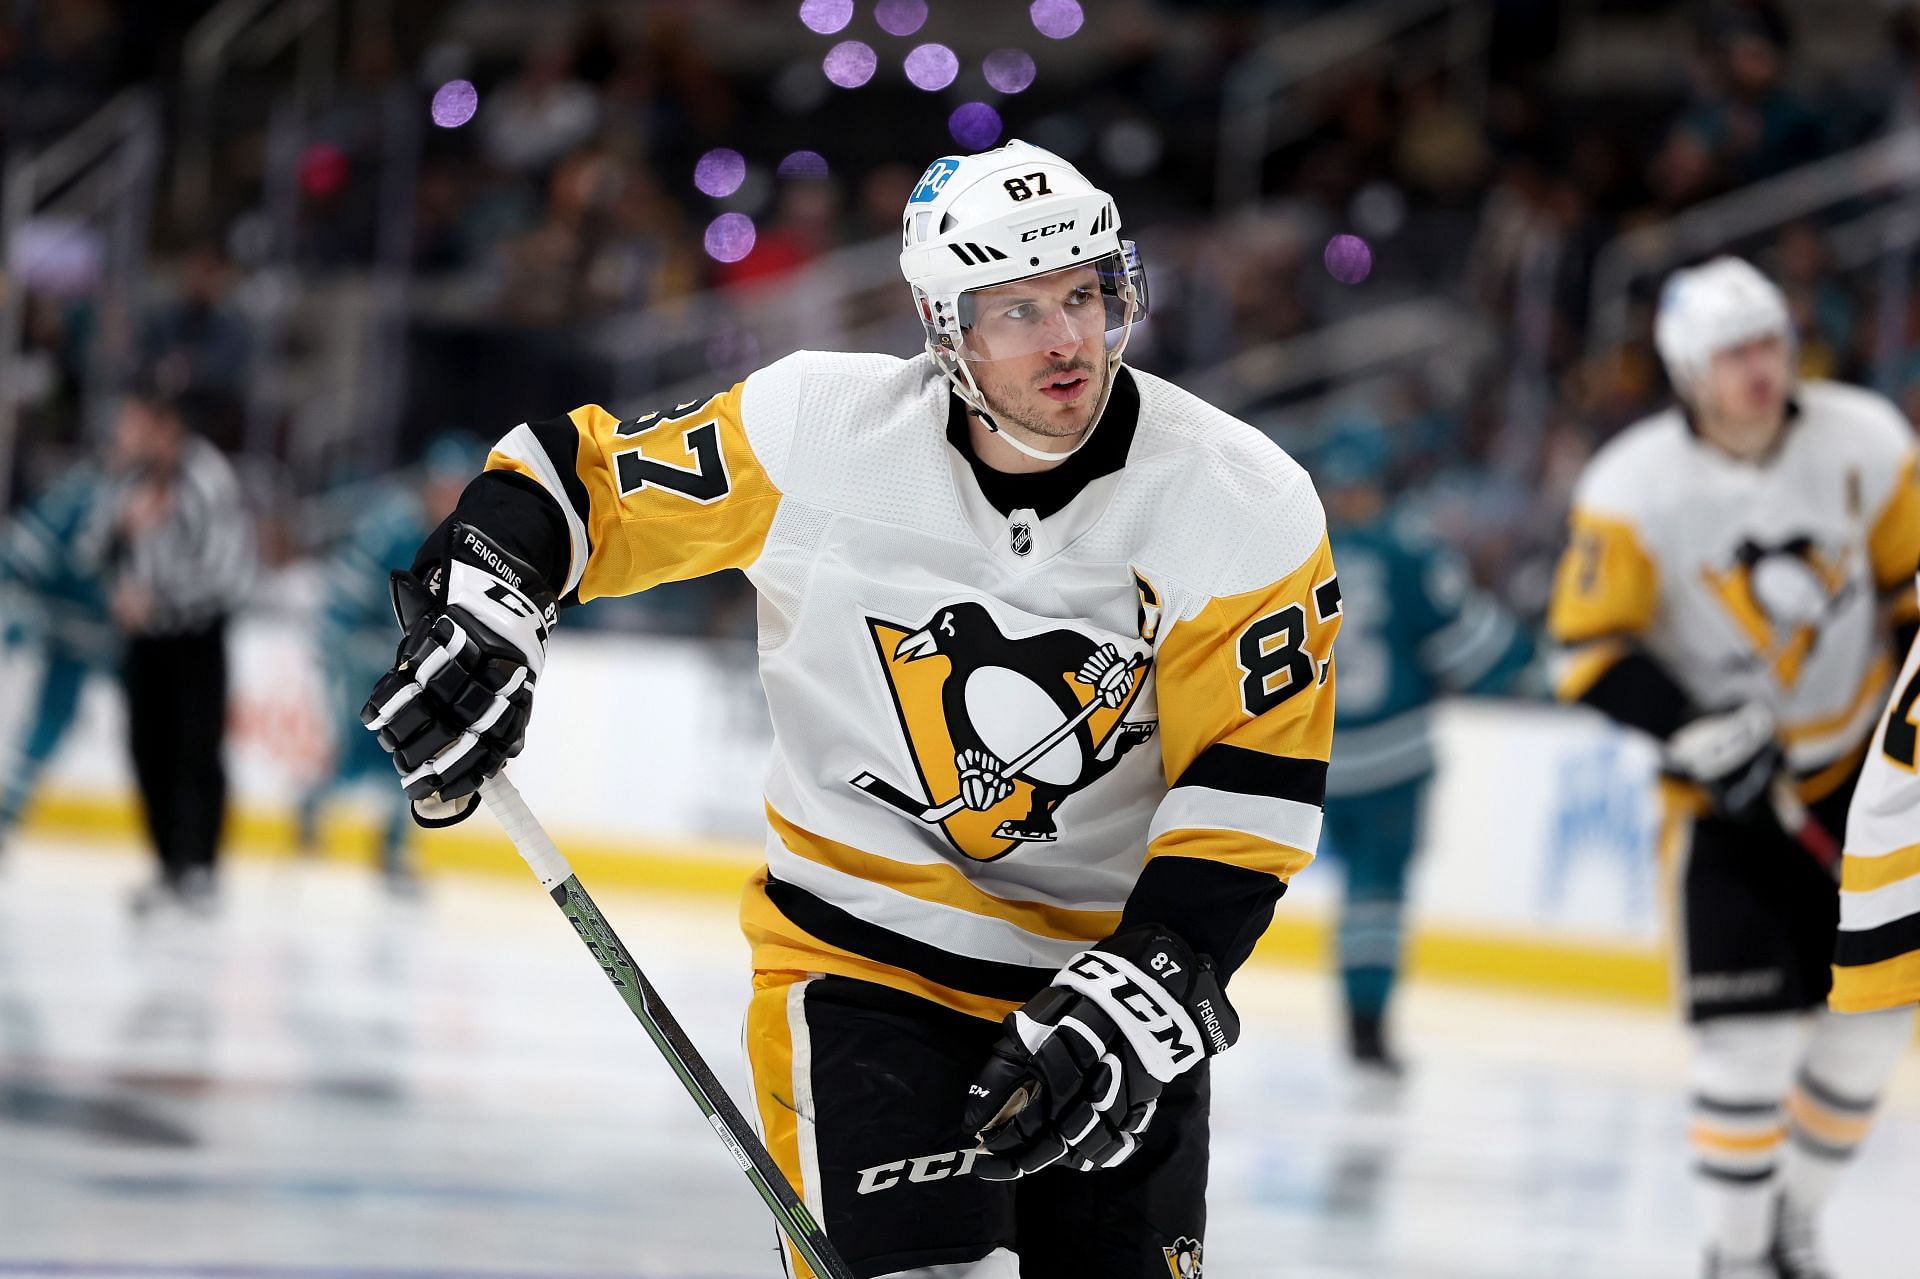 Genuine question - Why hasn't Crosby been on any of the NHL game cover? Is  it due to some contract or licence issues? Would be shame that one of the  greatest players